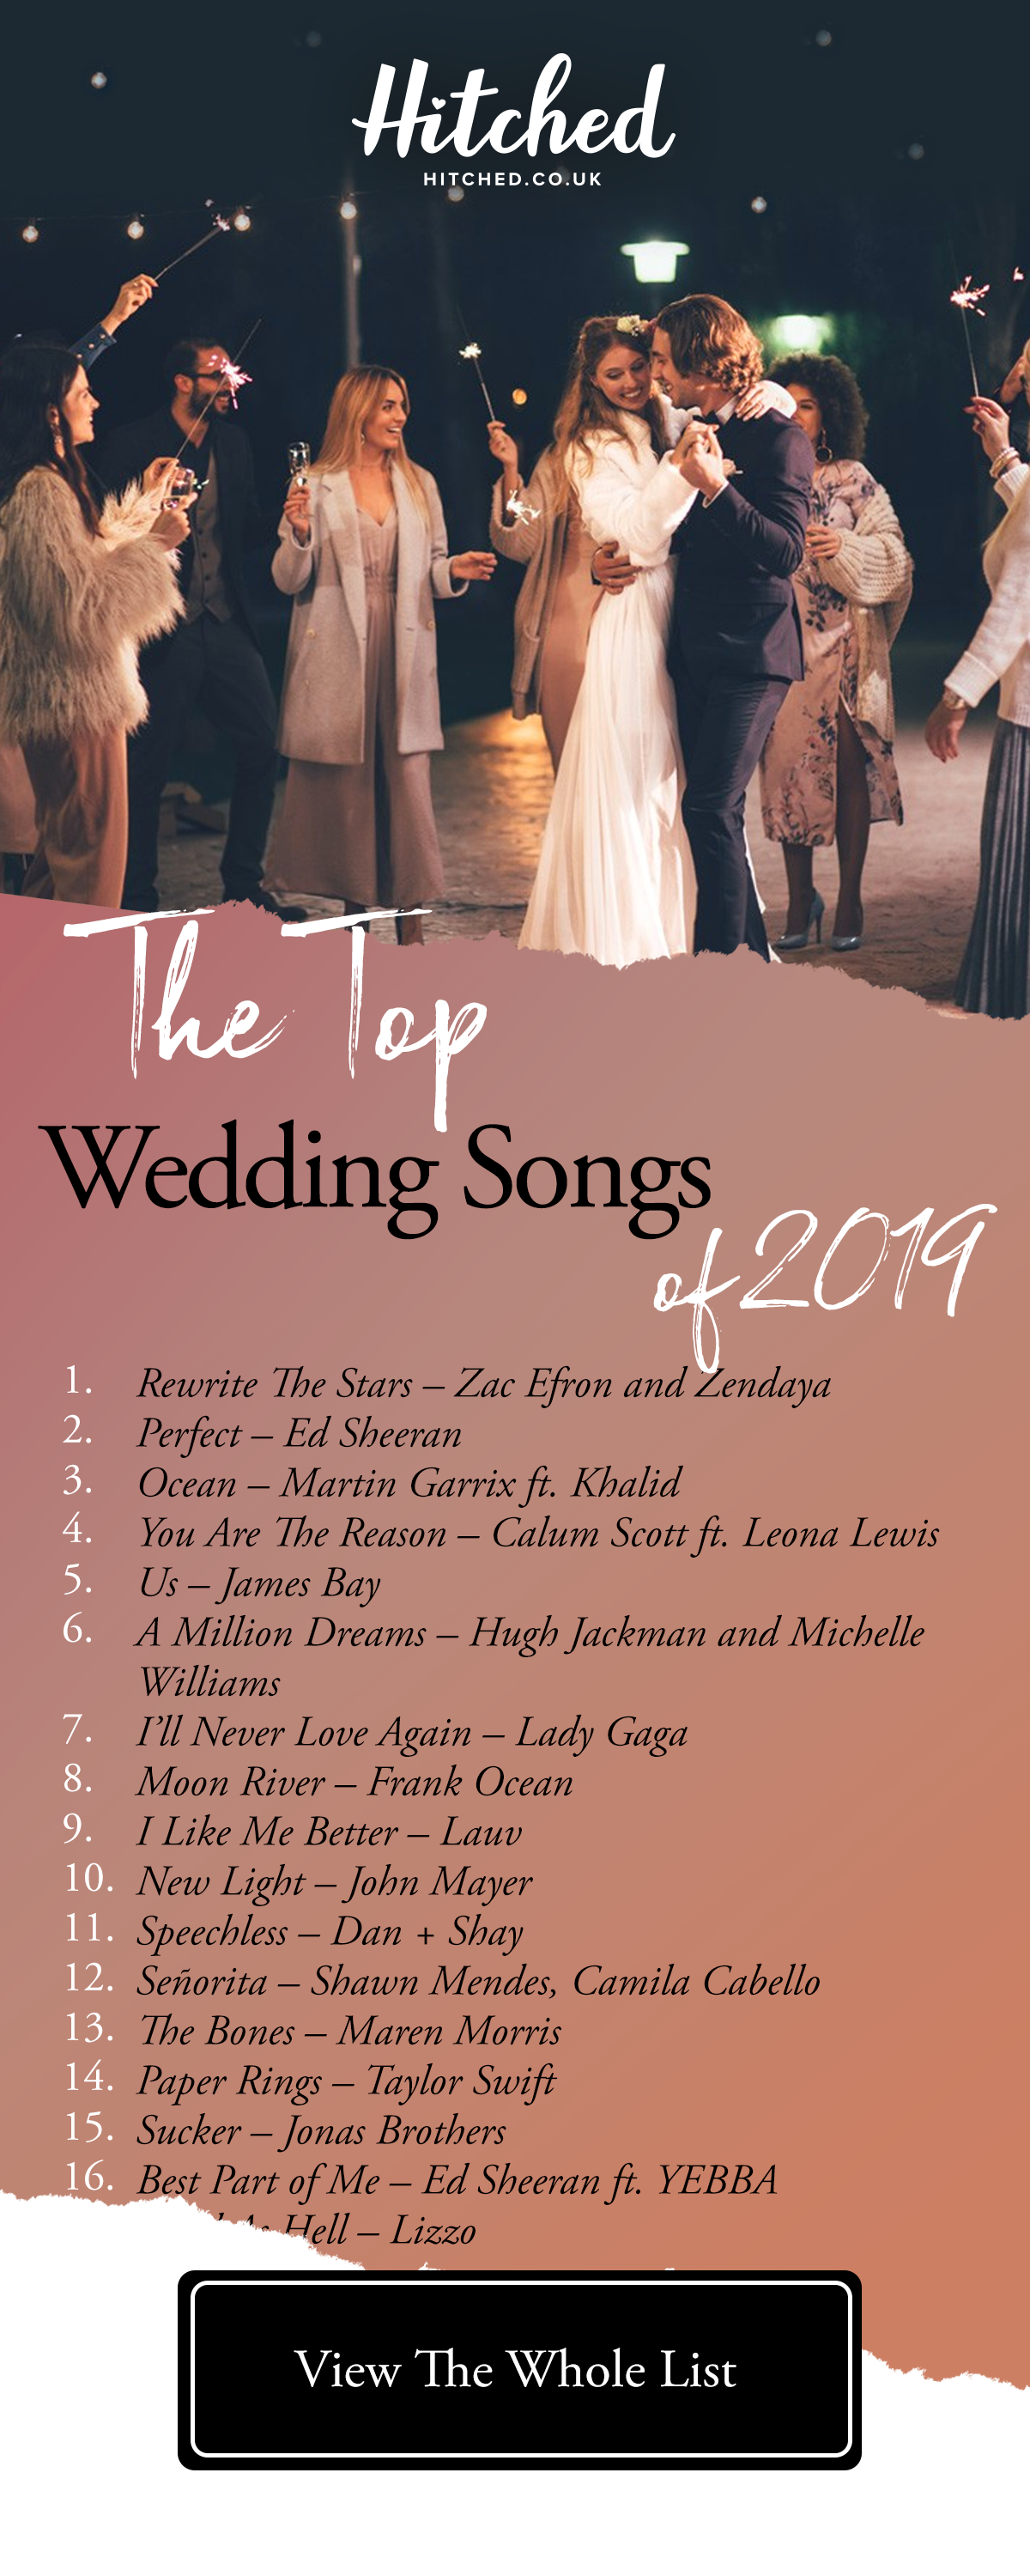 40 of the Best Wedding Songs of 2019 -   11 wedding Songs to sing ideas